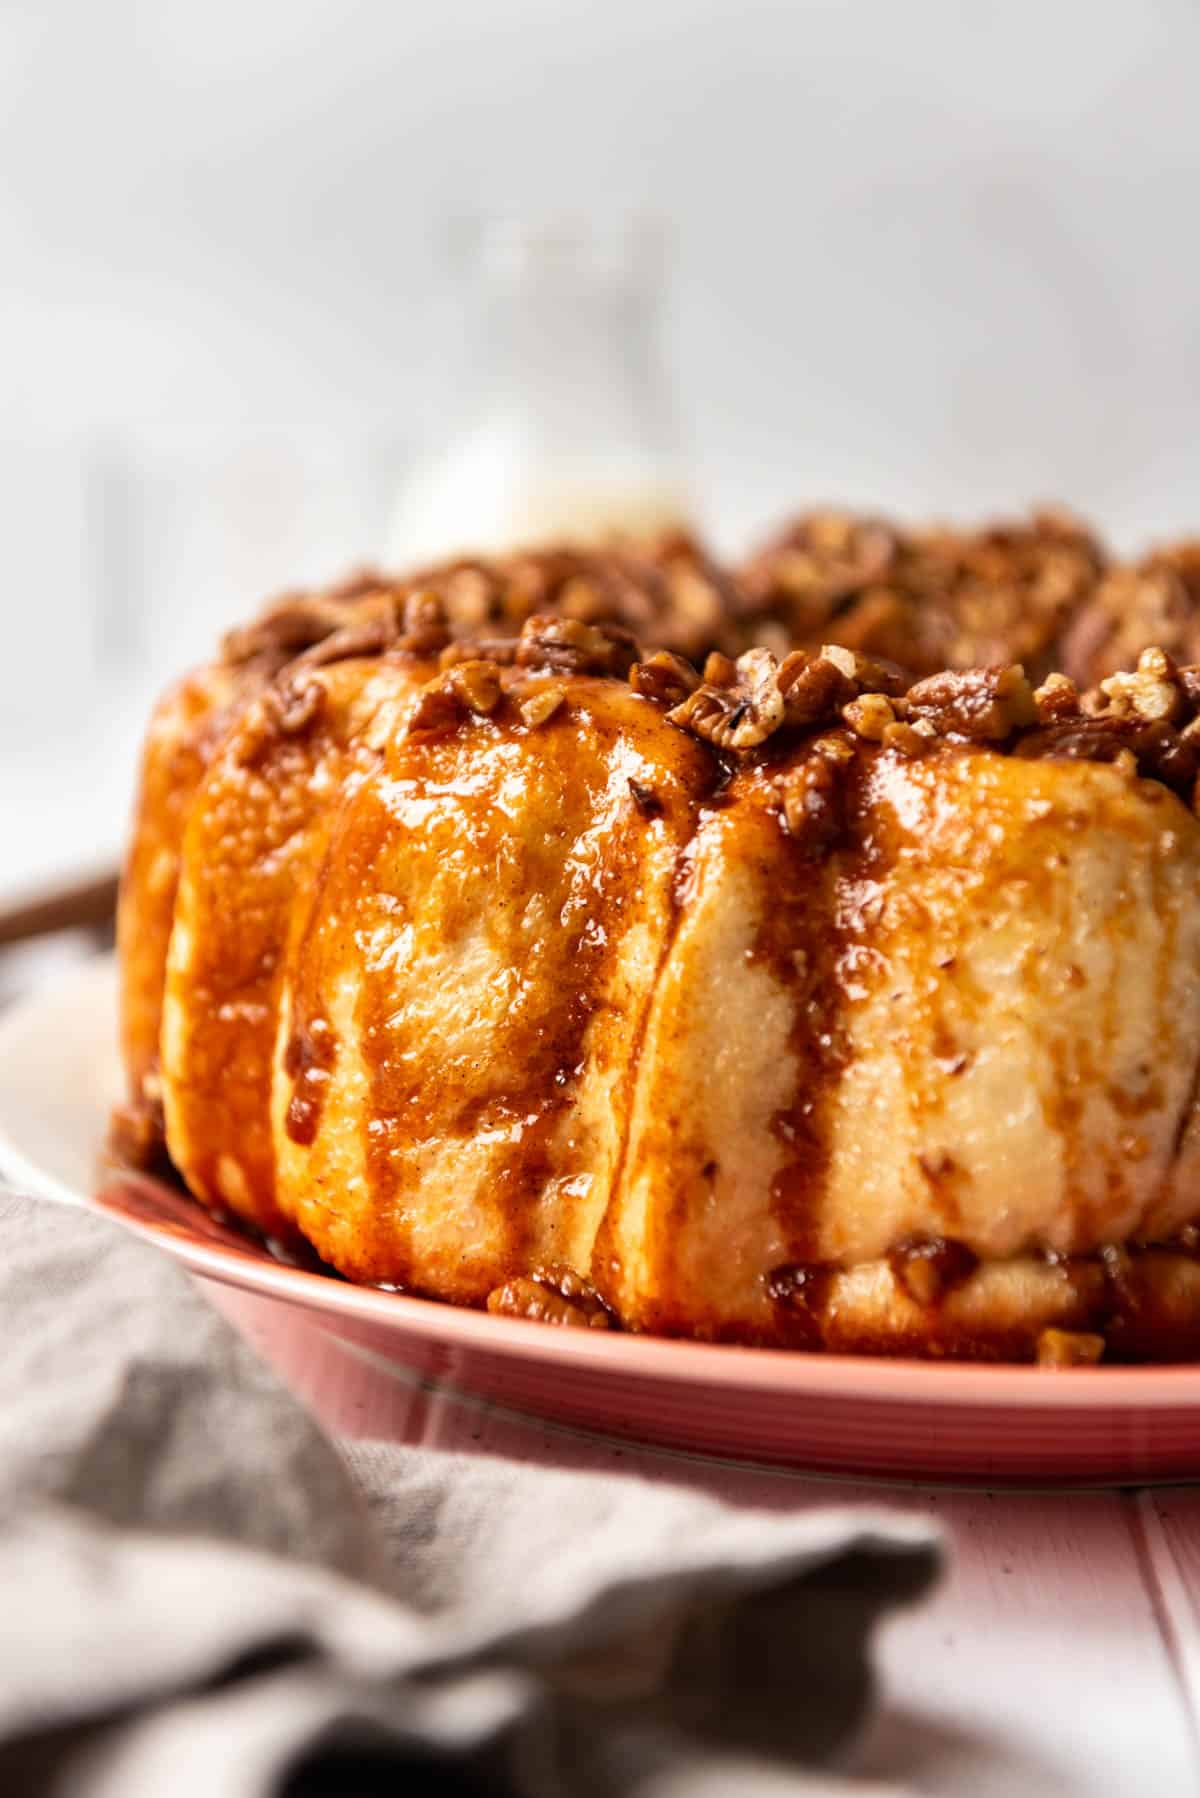 A side view of caramel pecan monkey bread on a pink plate.